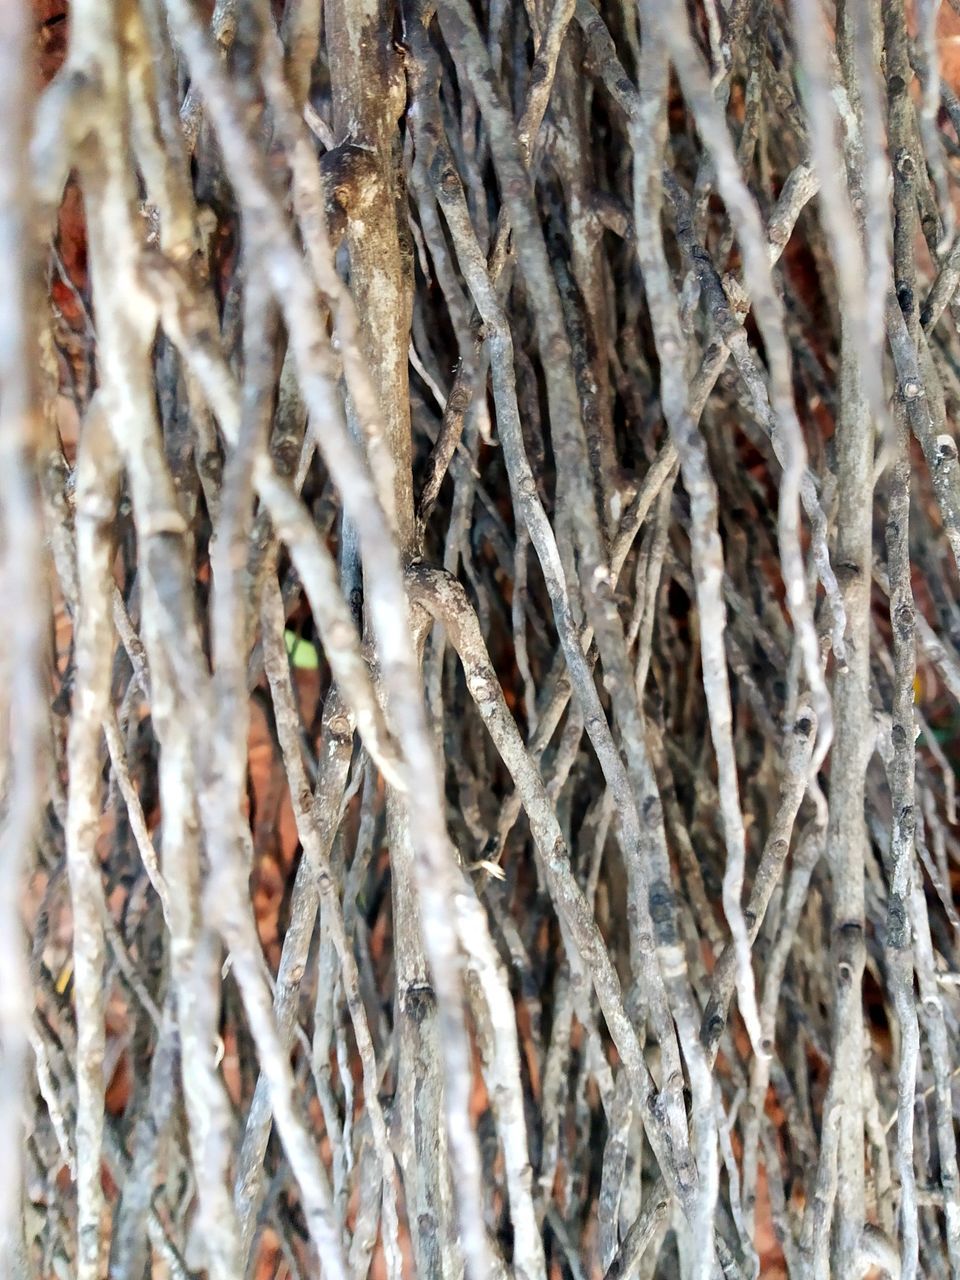 close-up, full frame, backgrounds, no people, pattern, day, textured, plant, nature, selective focus, abundance, outdoors, tree trunk, extreme close-up, dry, winter, trunk, tree, rusty, growth